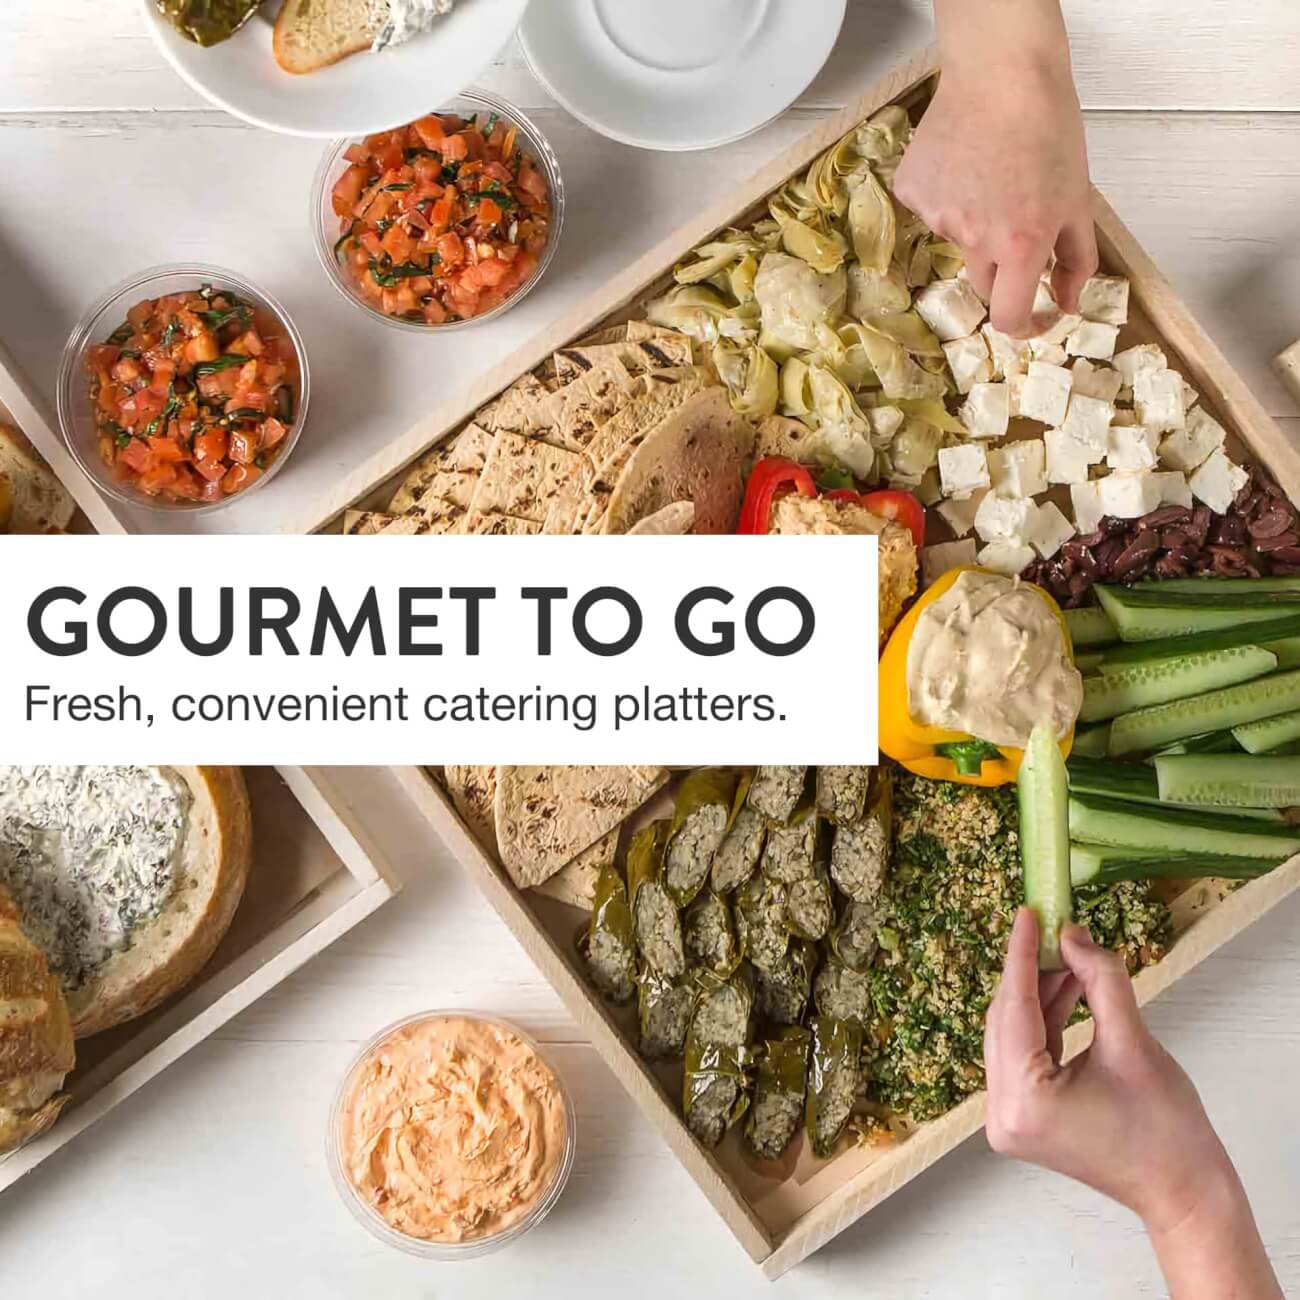 Gourmet to Go Fresh, convenient catering platters.